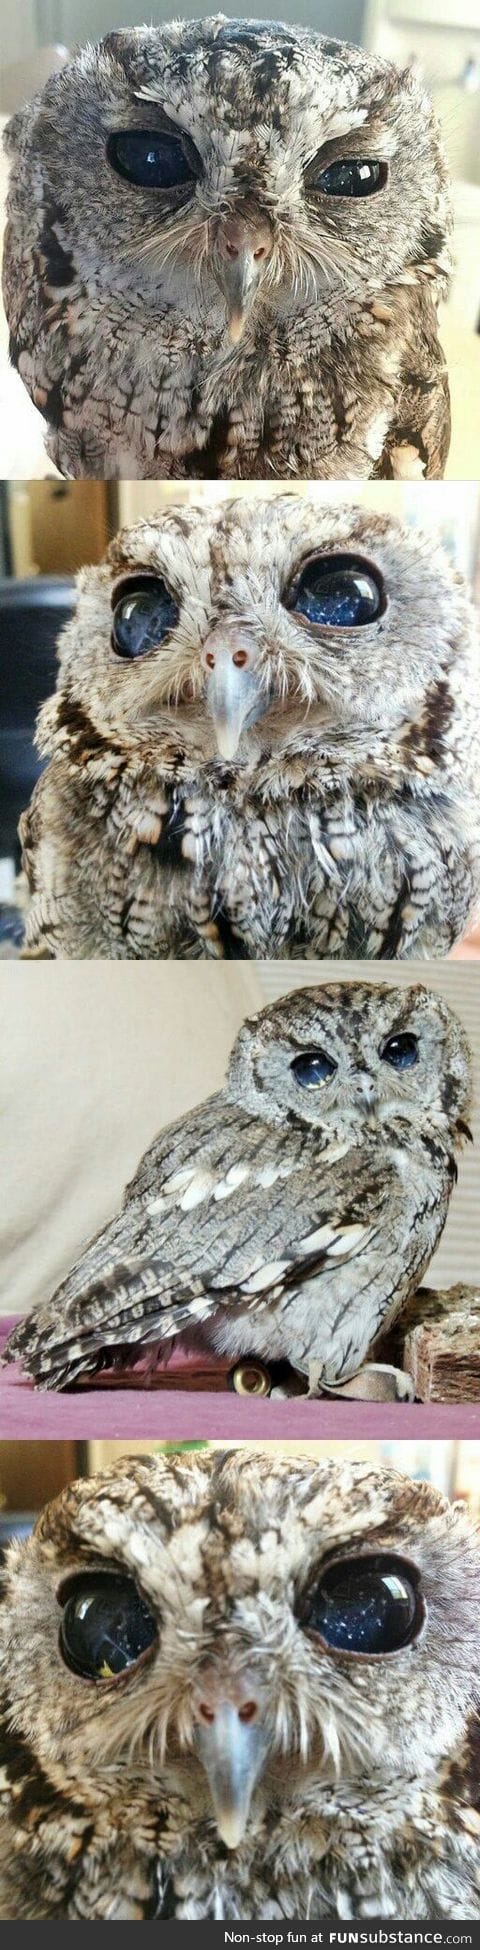 More photos of the blind owl with eyes like the night sky